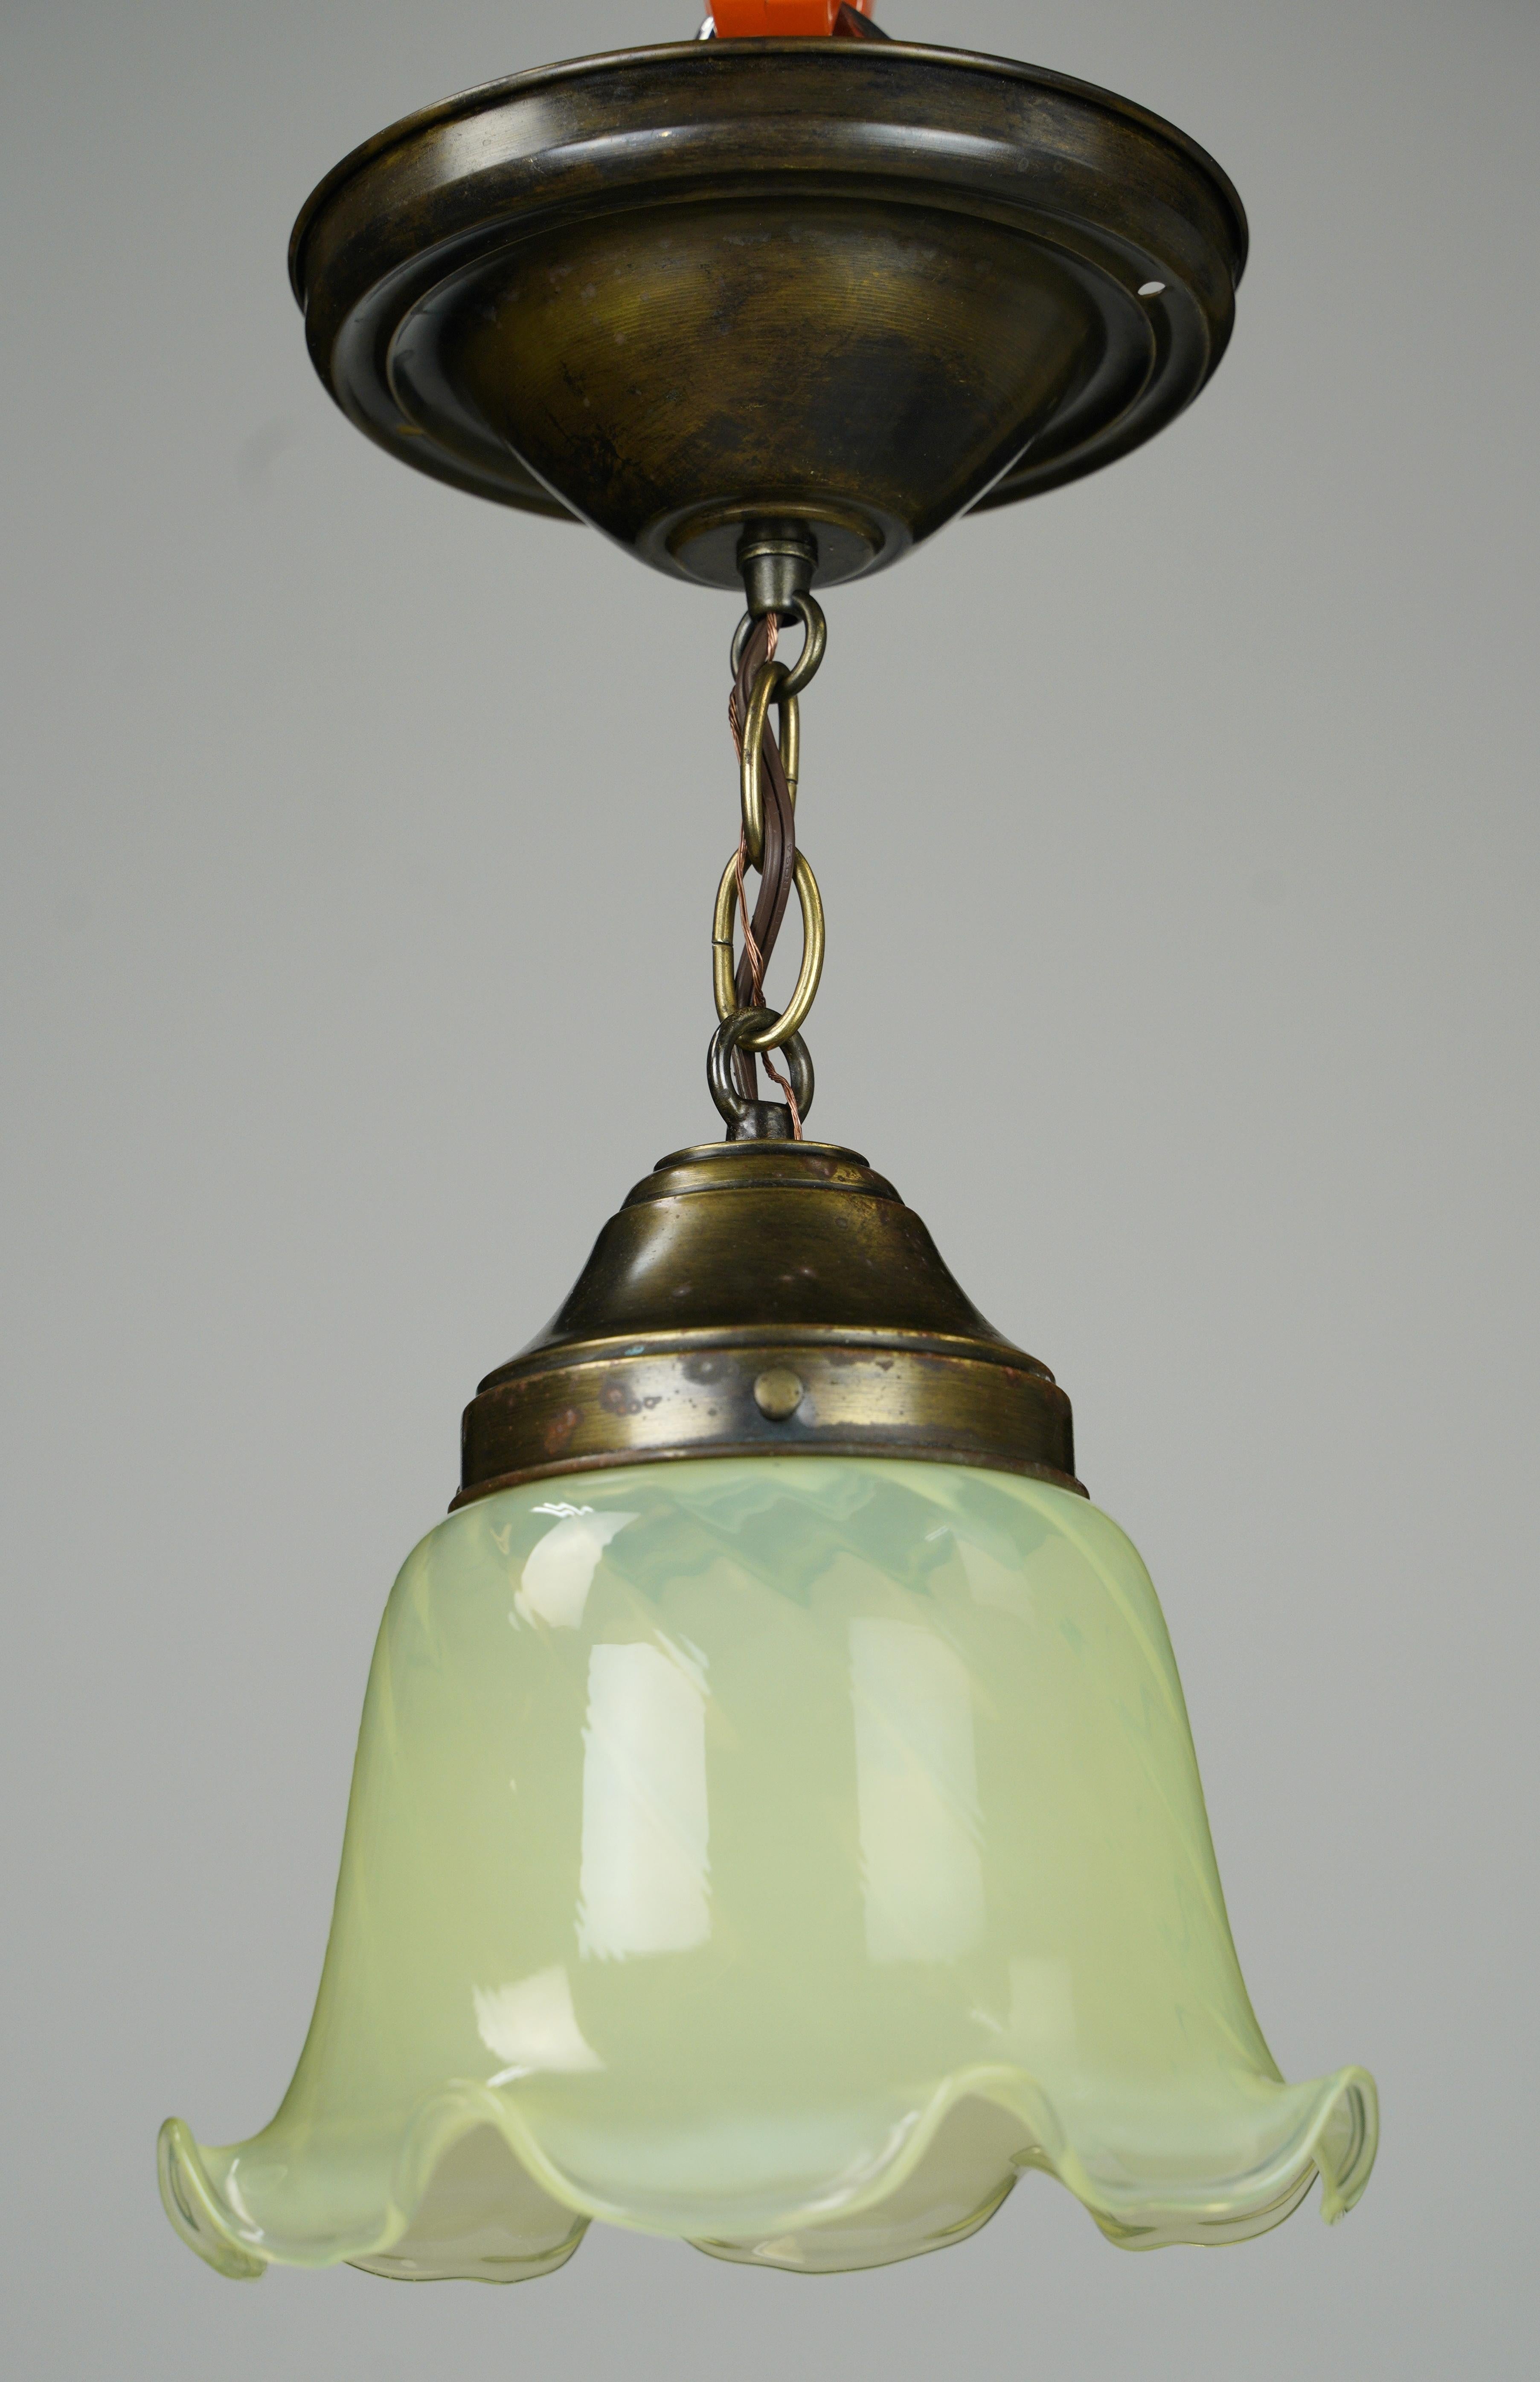 Antique ruffled edge pale green uranium glass shade paired with a newly made antique brass finish chain fitter. This is in very good newly wired condition and ready to install. One available. Cleaned and restored. Please note, this item is located